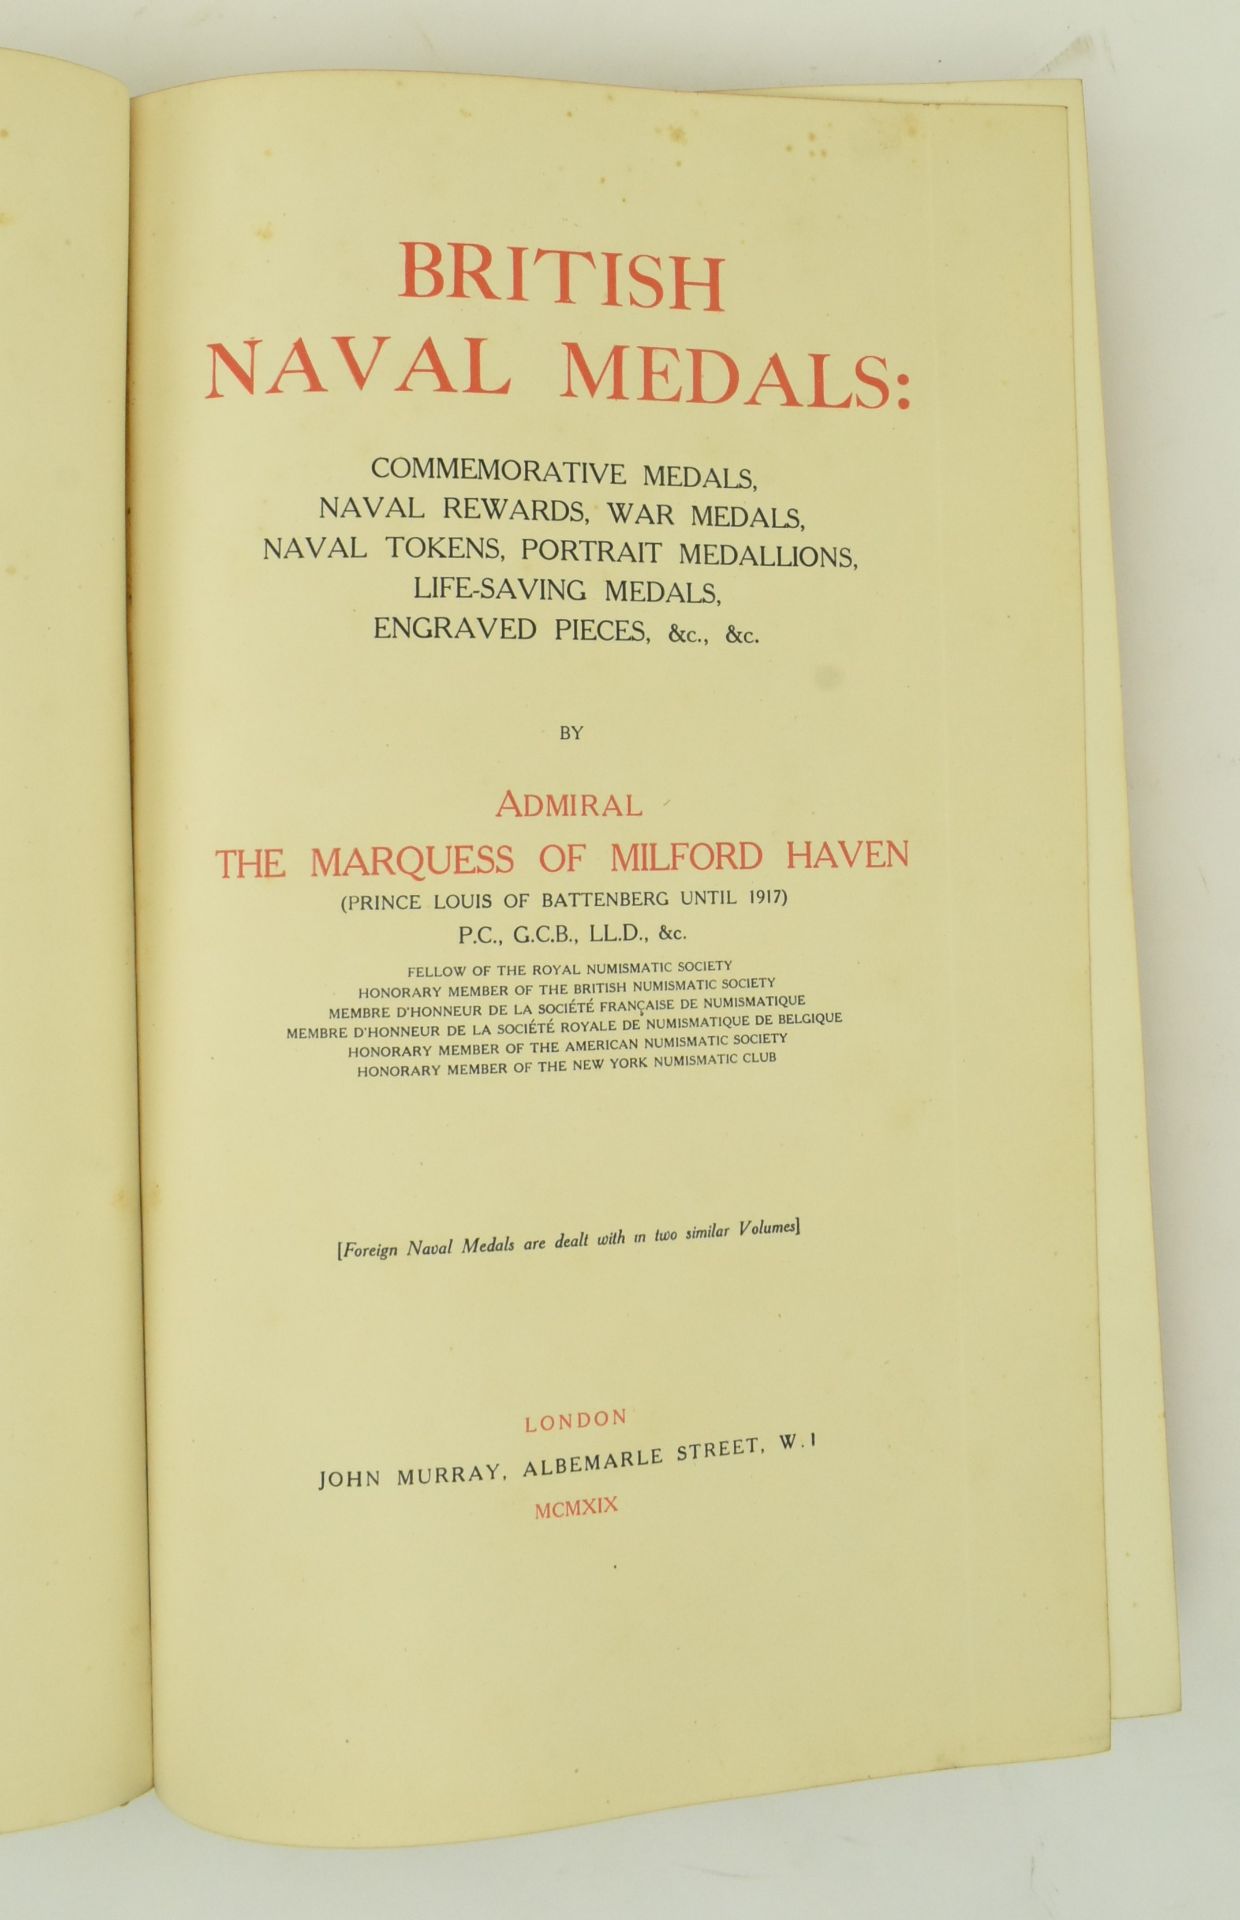 1919 BRITISH NAVAL MEDALS BY THE MARQUESS OF MILFORD HAVEN - Image 2 of 7